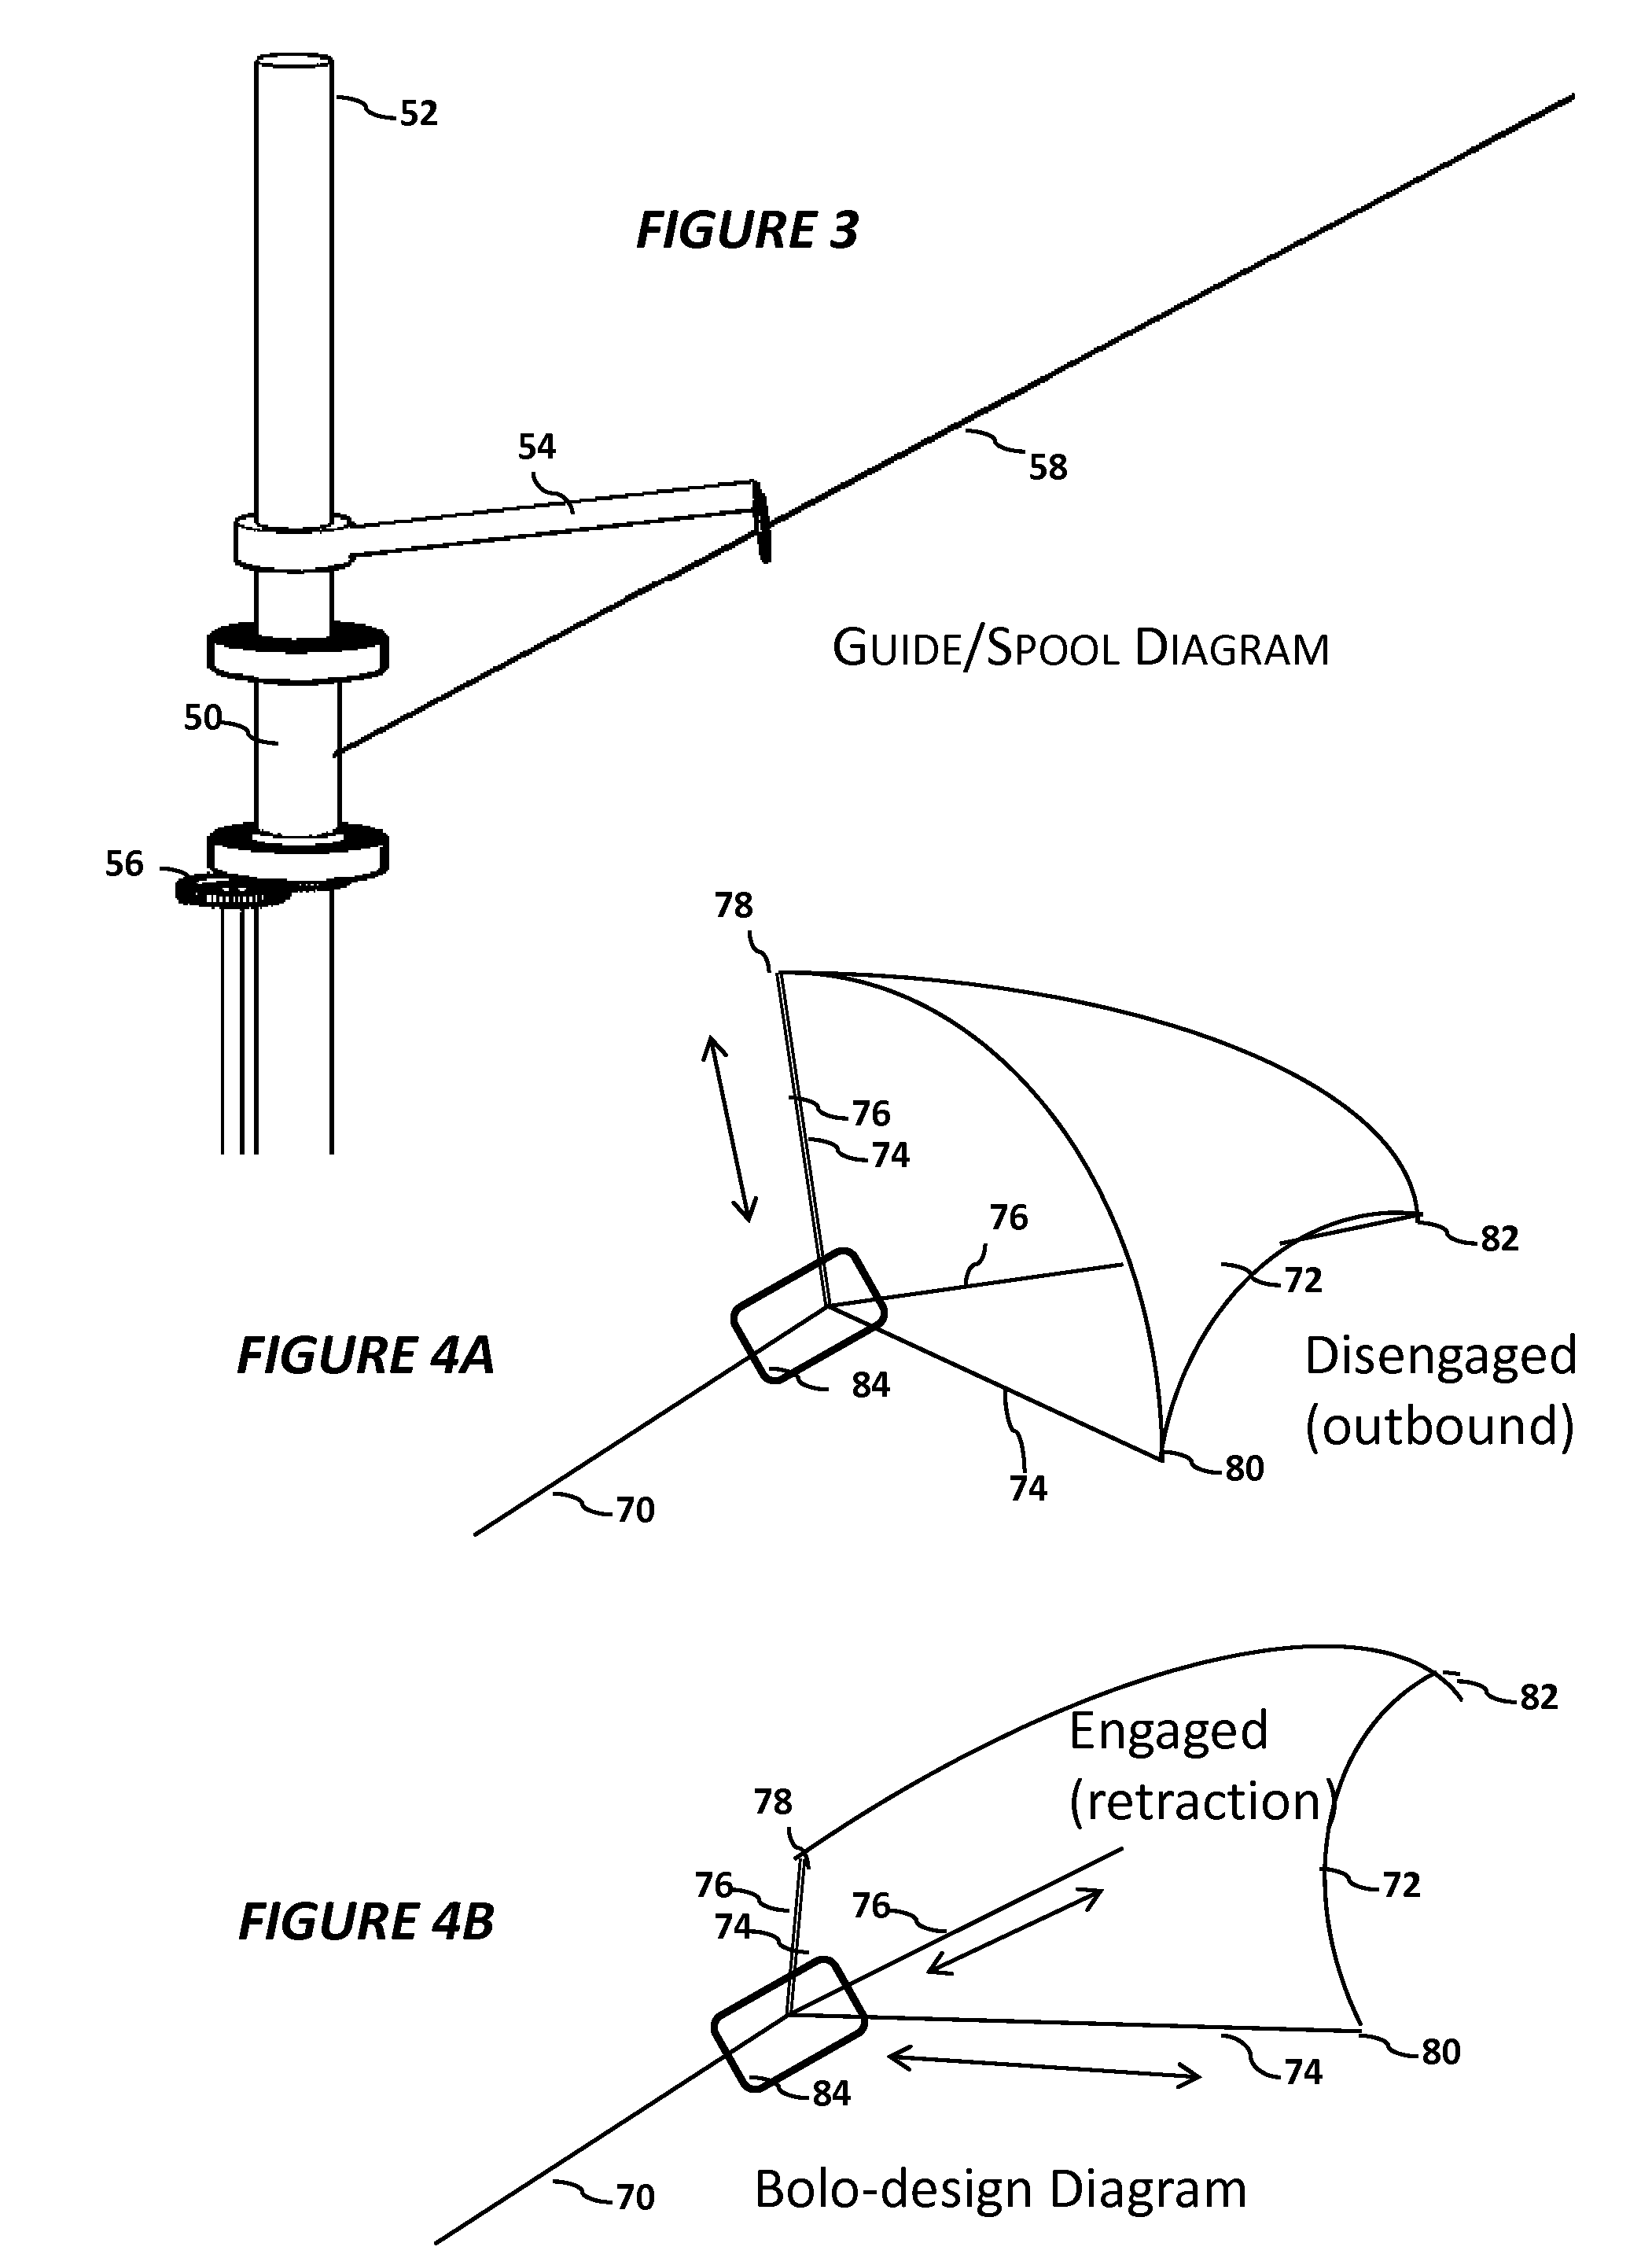 System and method for harnessing wind power at variable altitudes